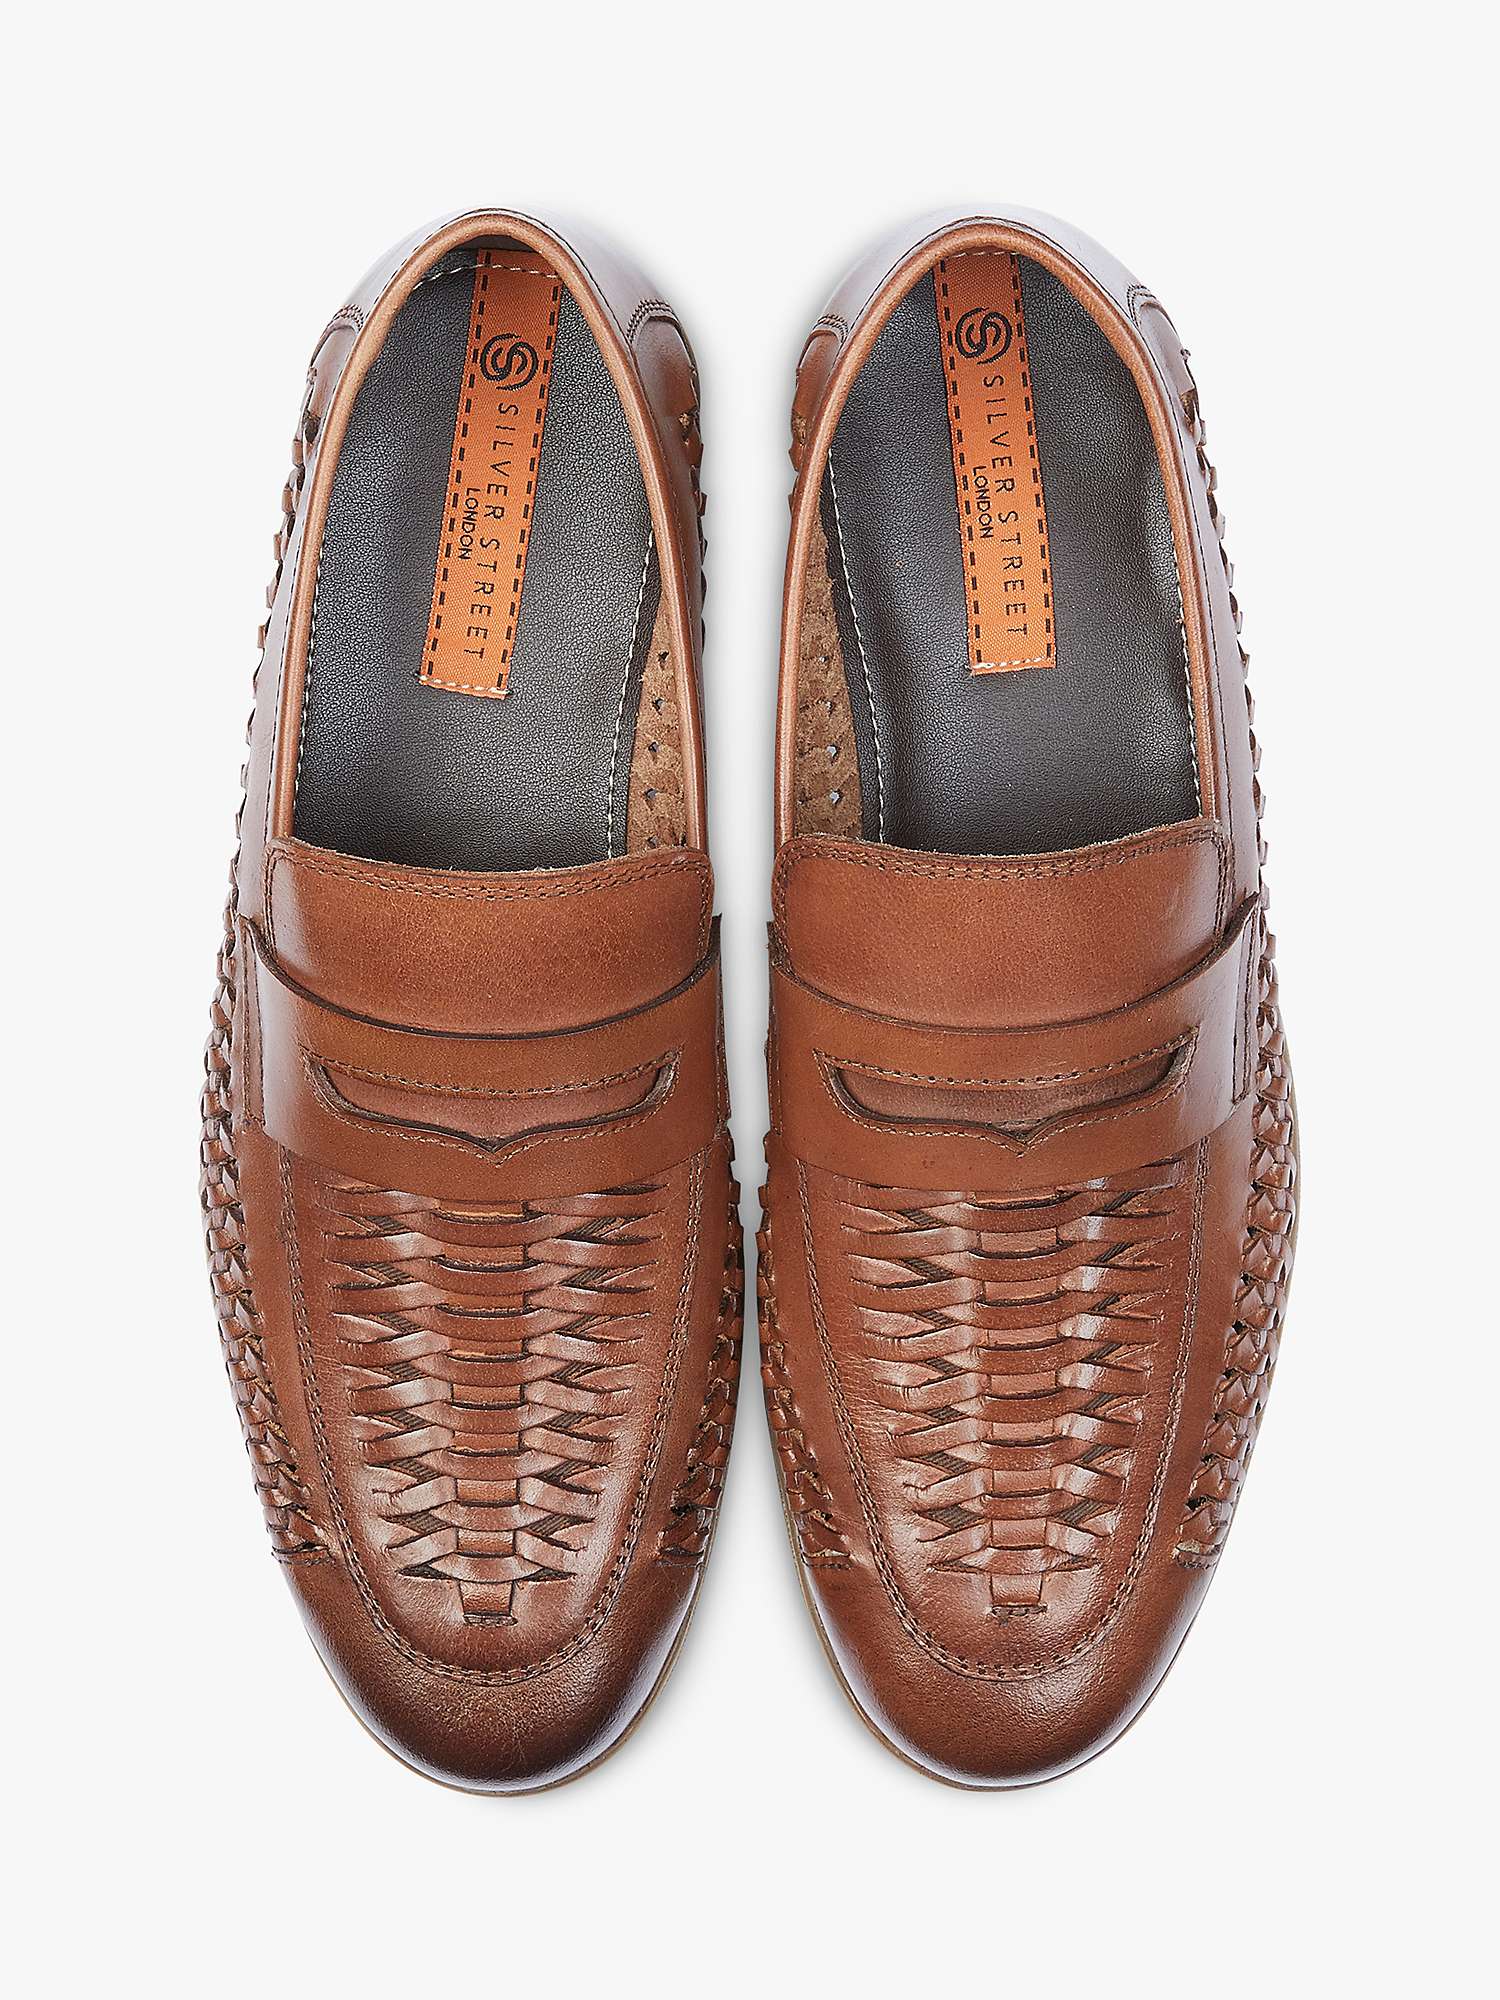 Buy Silver Street London Perth Leather Loafers Online at johnlewis.com